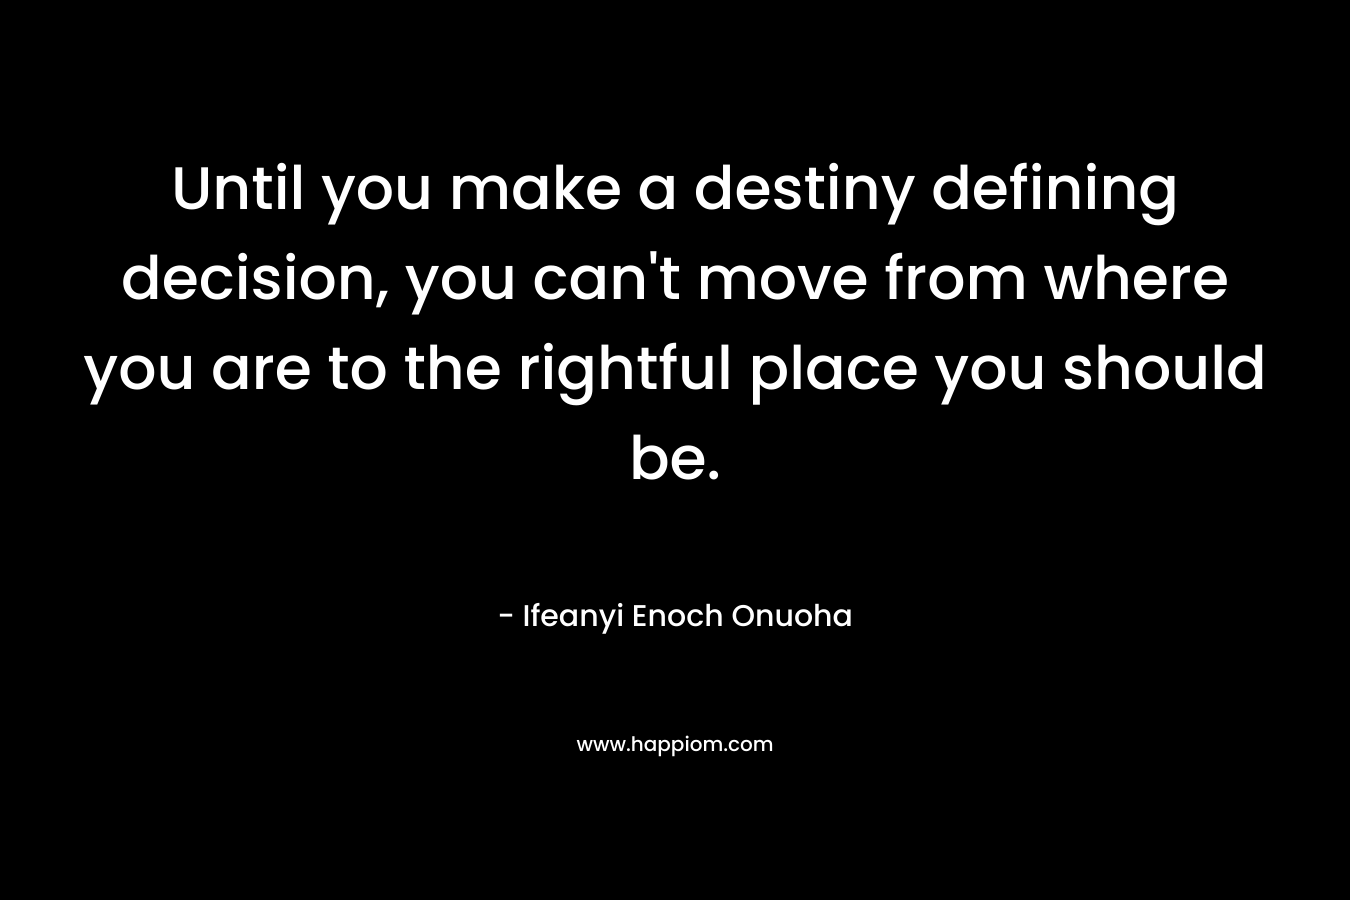 Until you make a destiny defining decision, you can't move from where you are to the rightful place you should be.